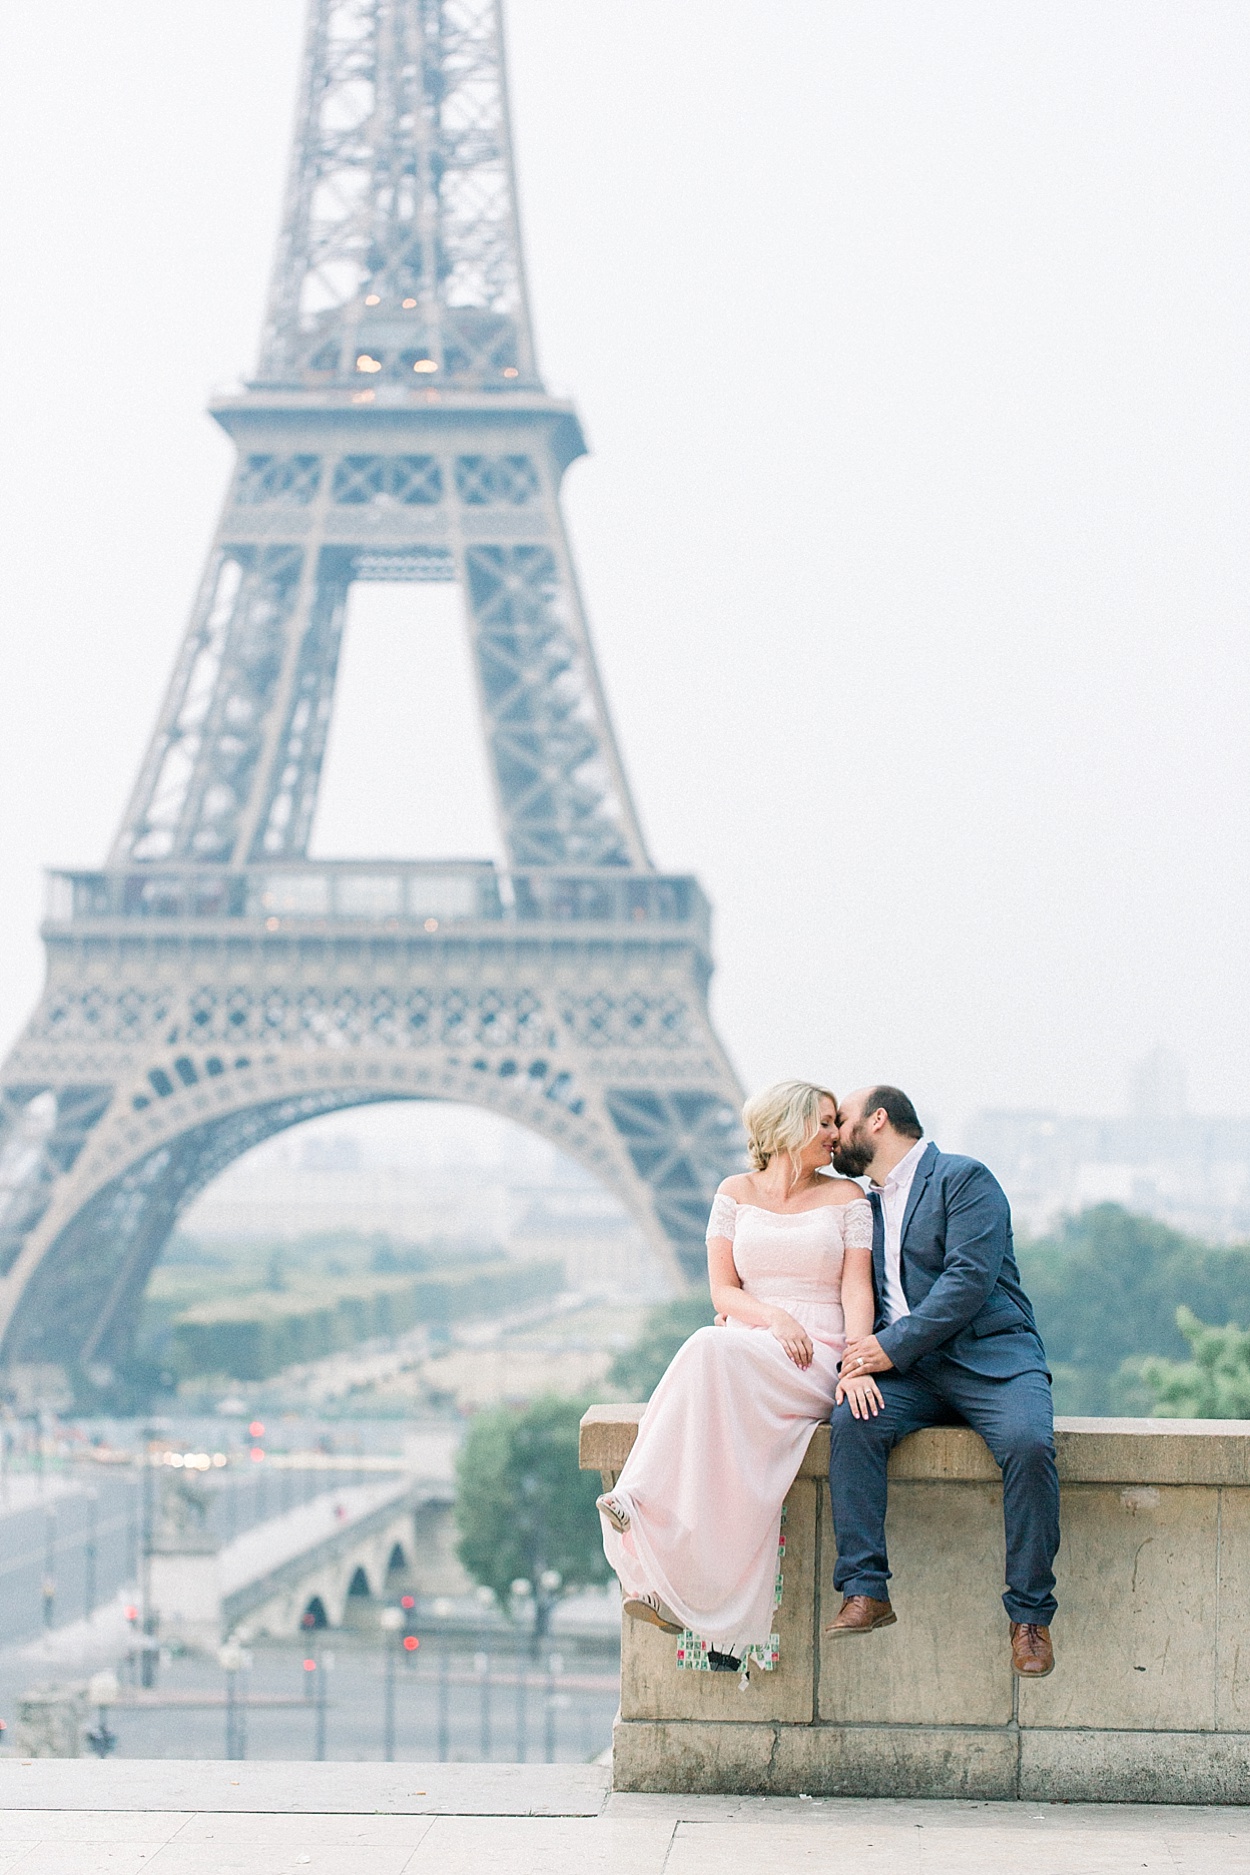 Paris anniversary photos at the Eiffel Tower | by Abby Grace